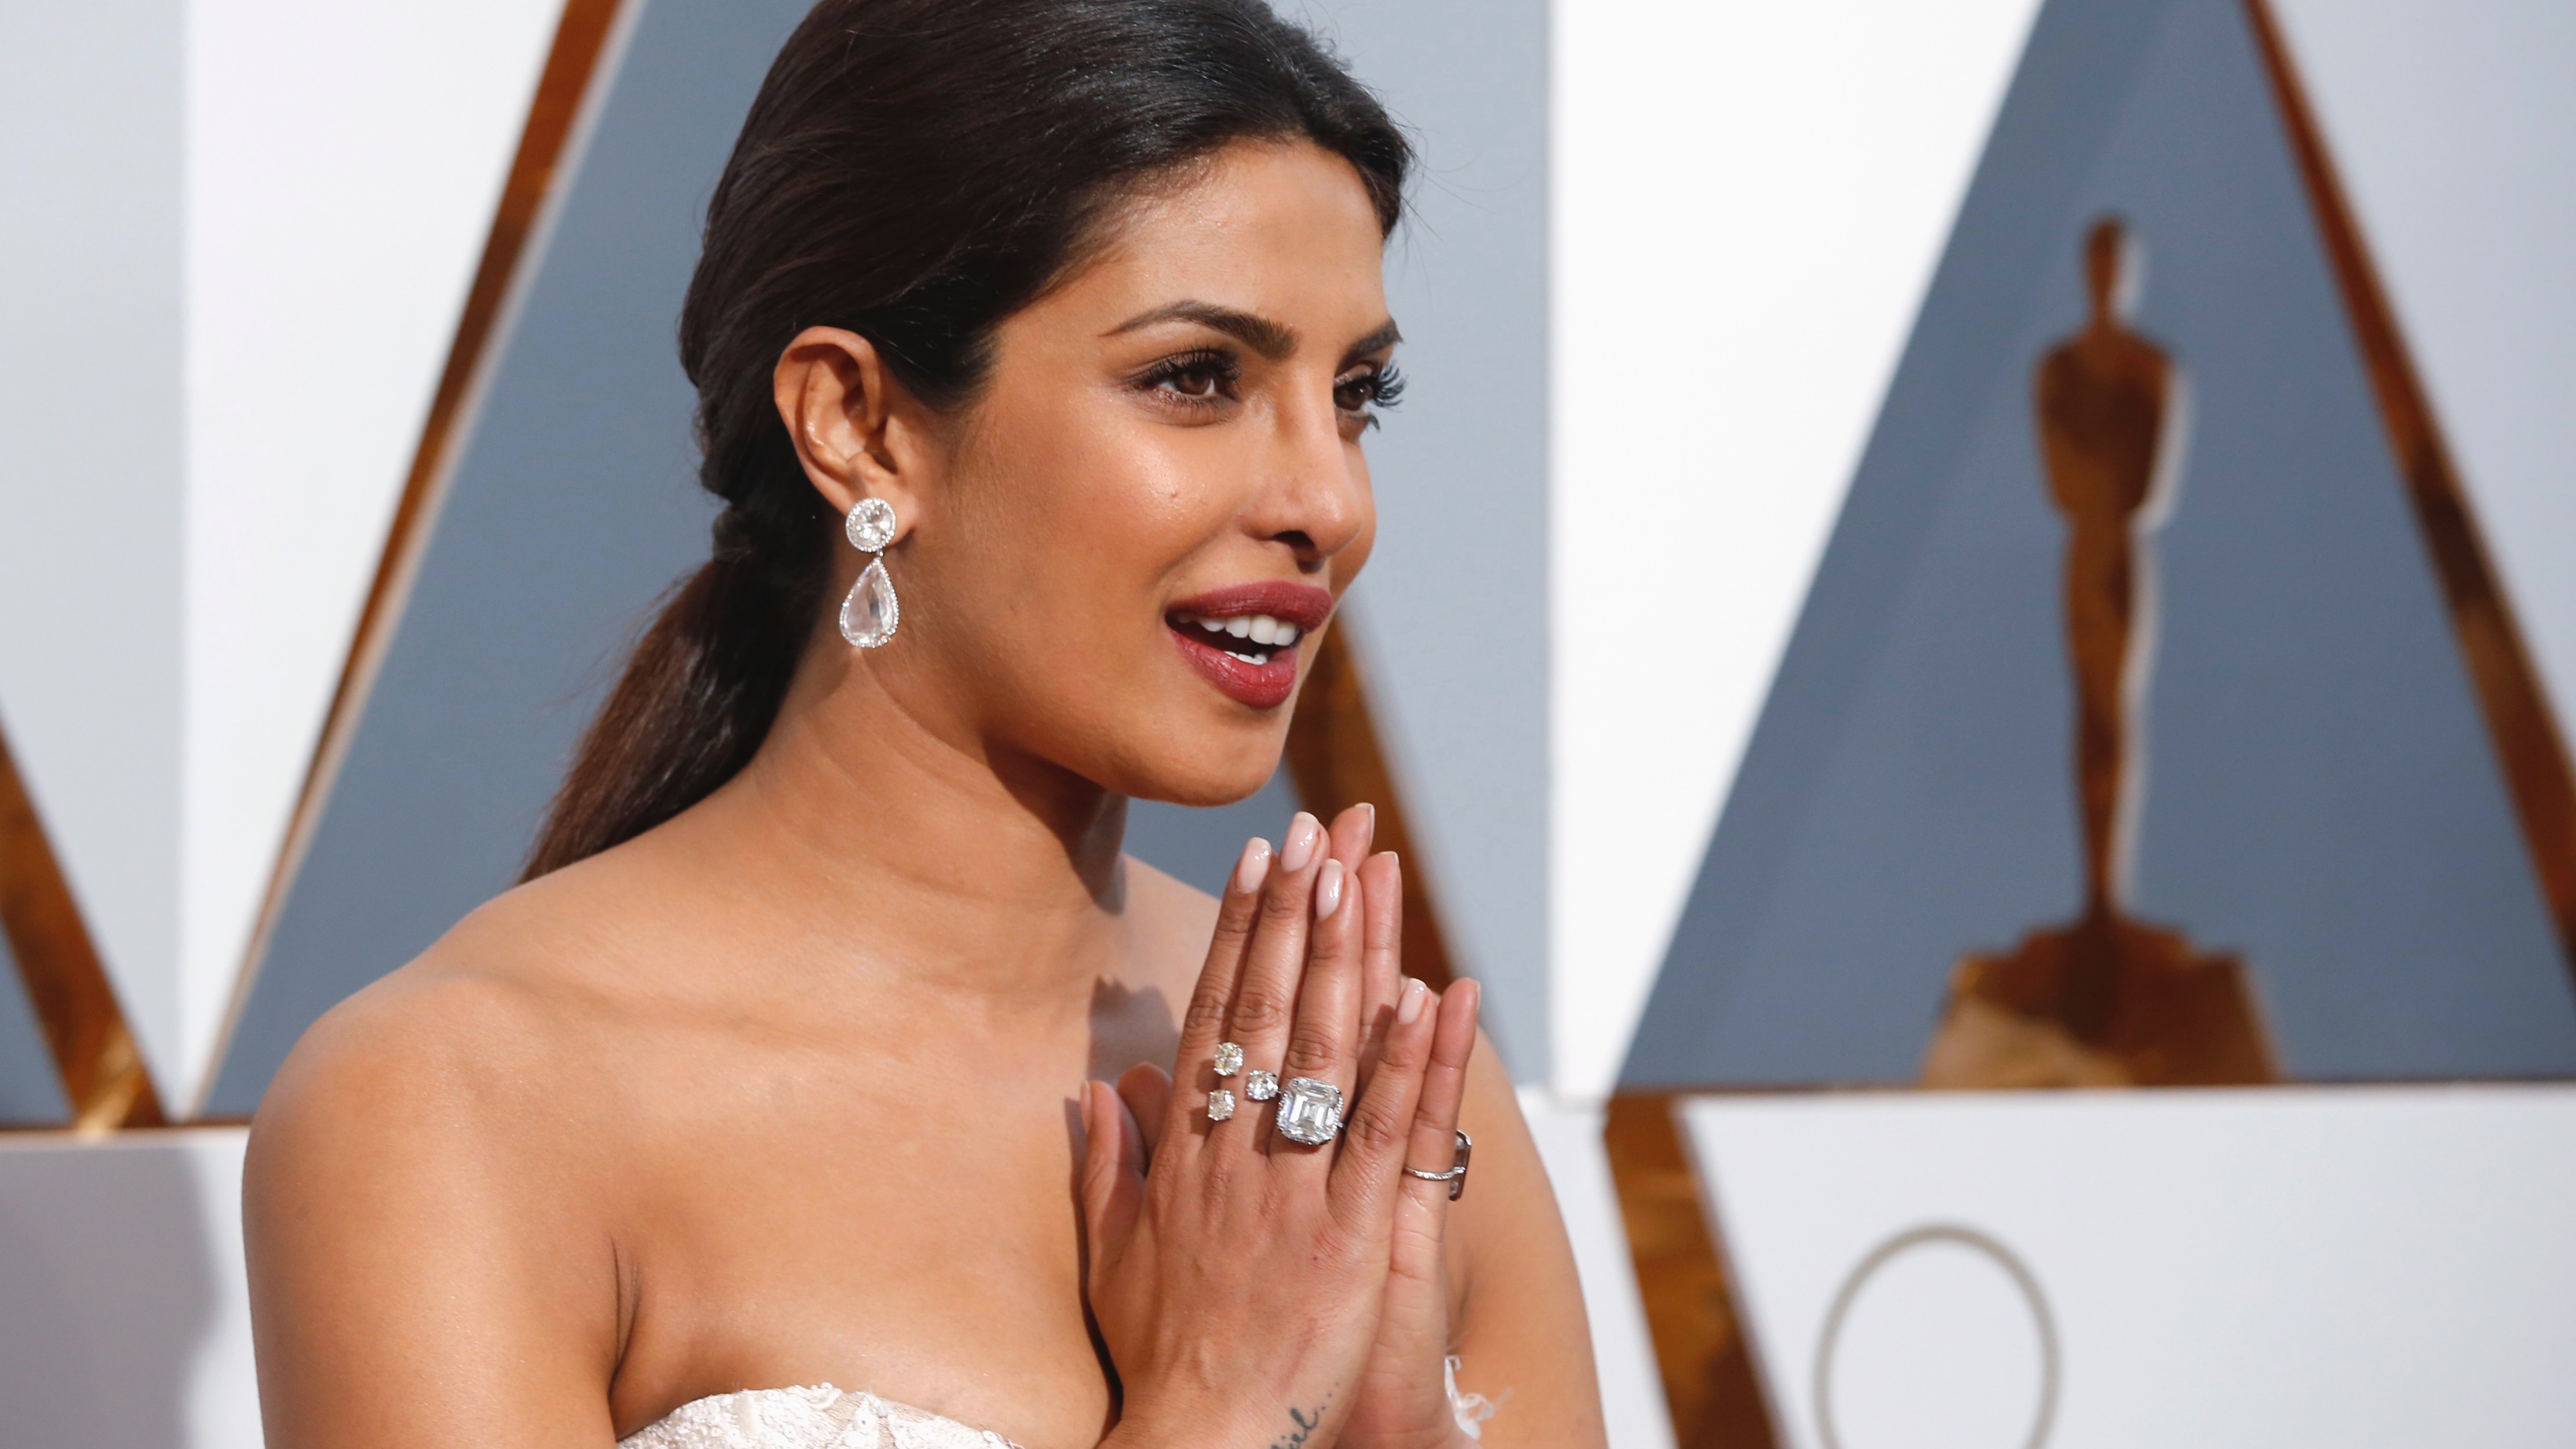 Priyanka Chopra apologises for promoting an offensive message about Refugees